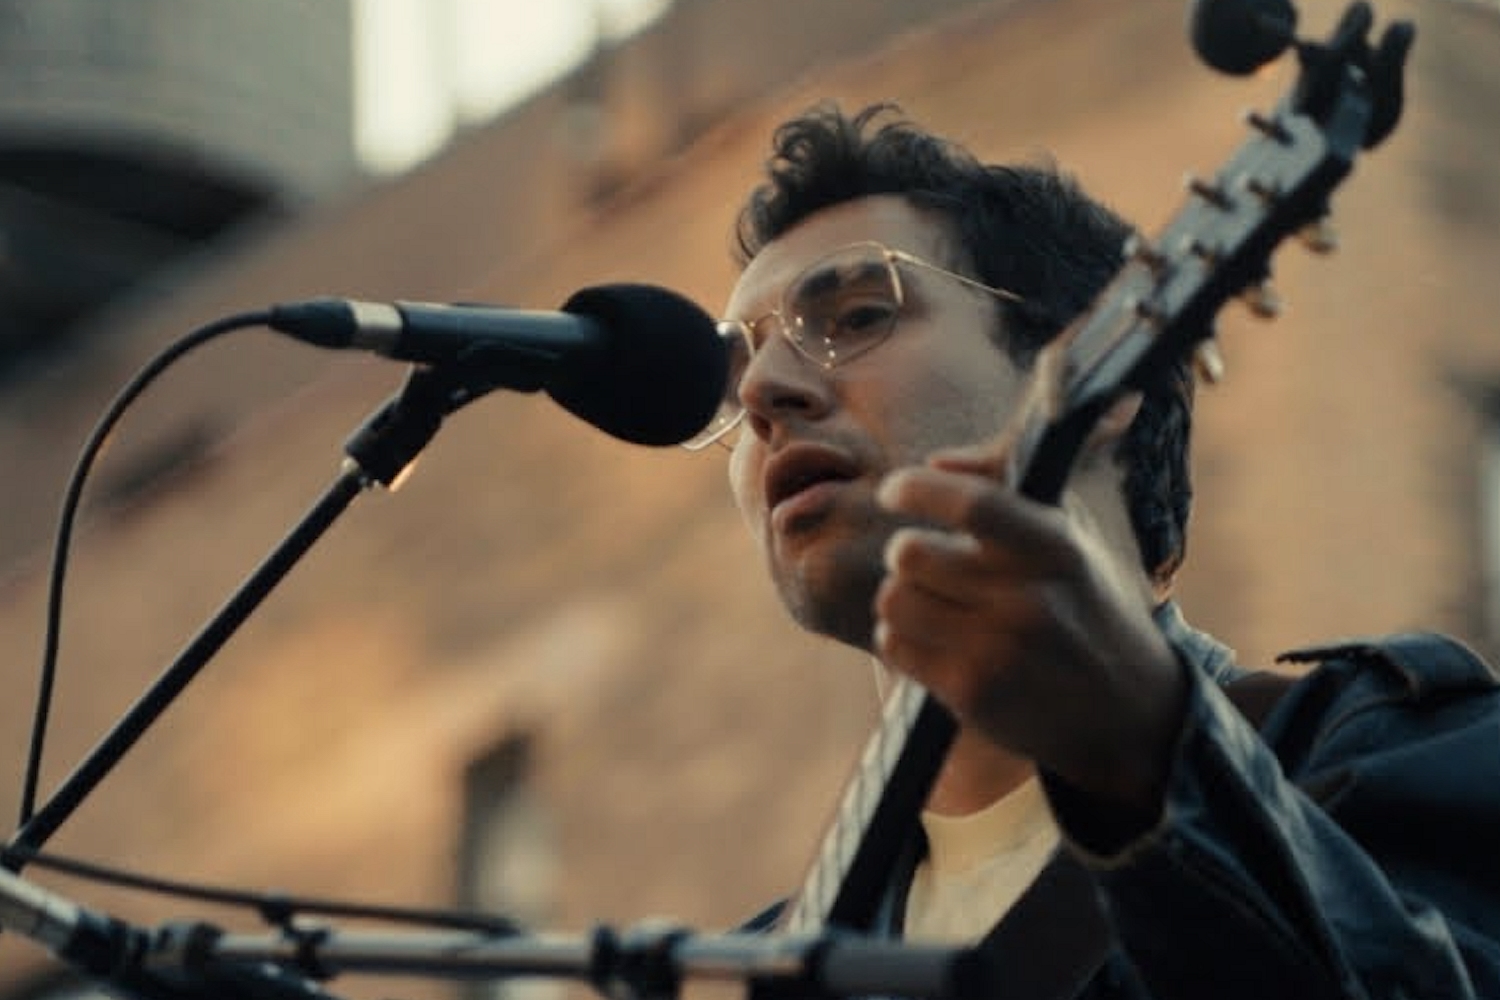 Bleachers perform ‘chinatown’ and ‘45’ live